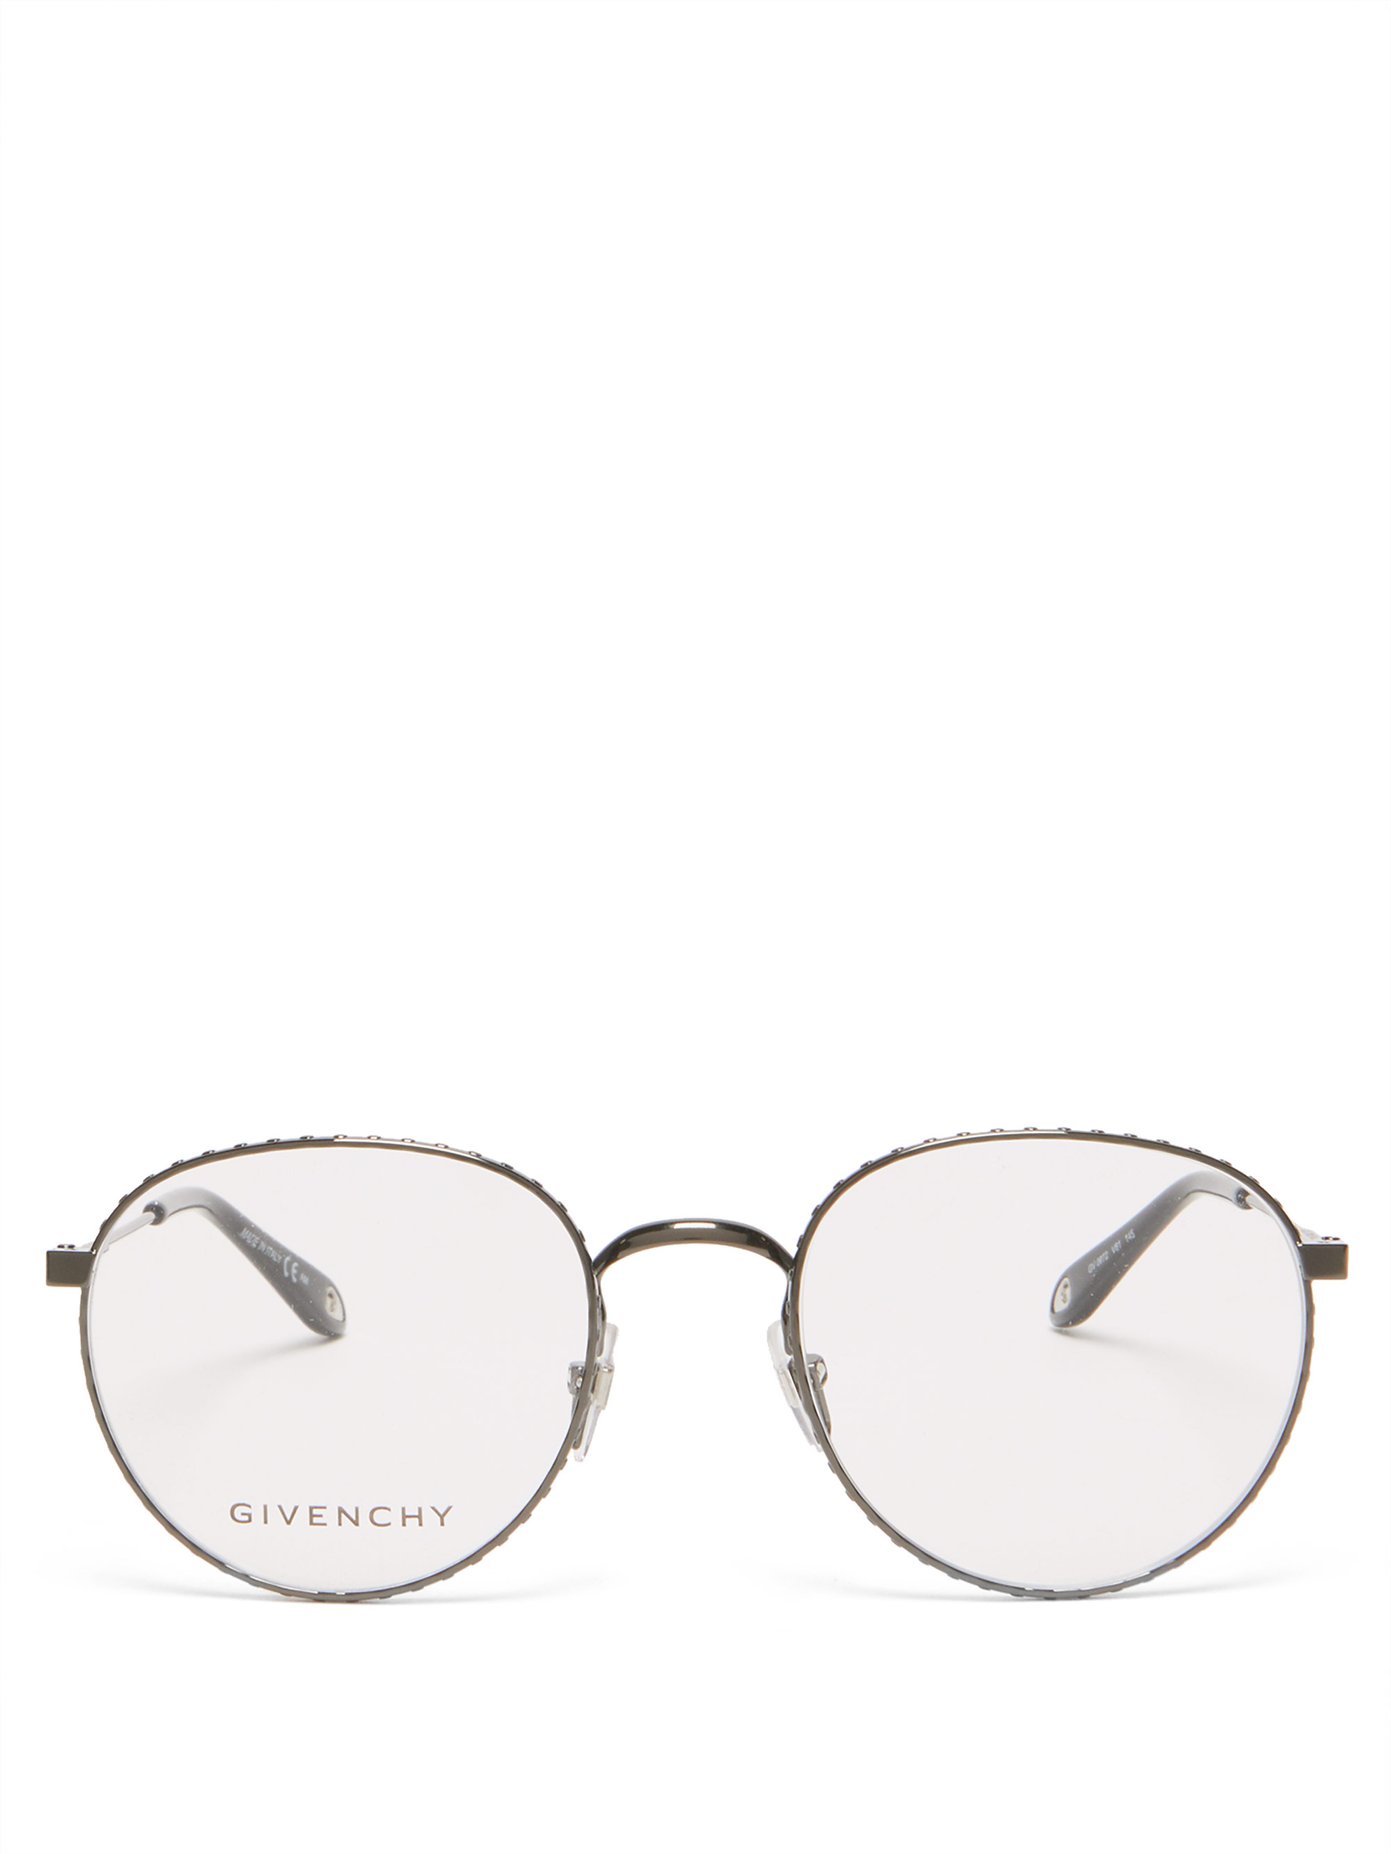 Studded round metal glasses | Givenchy 